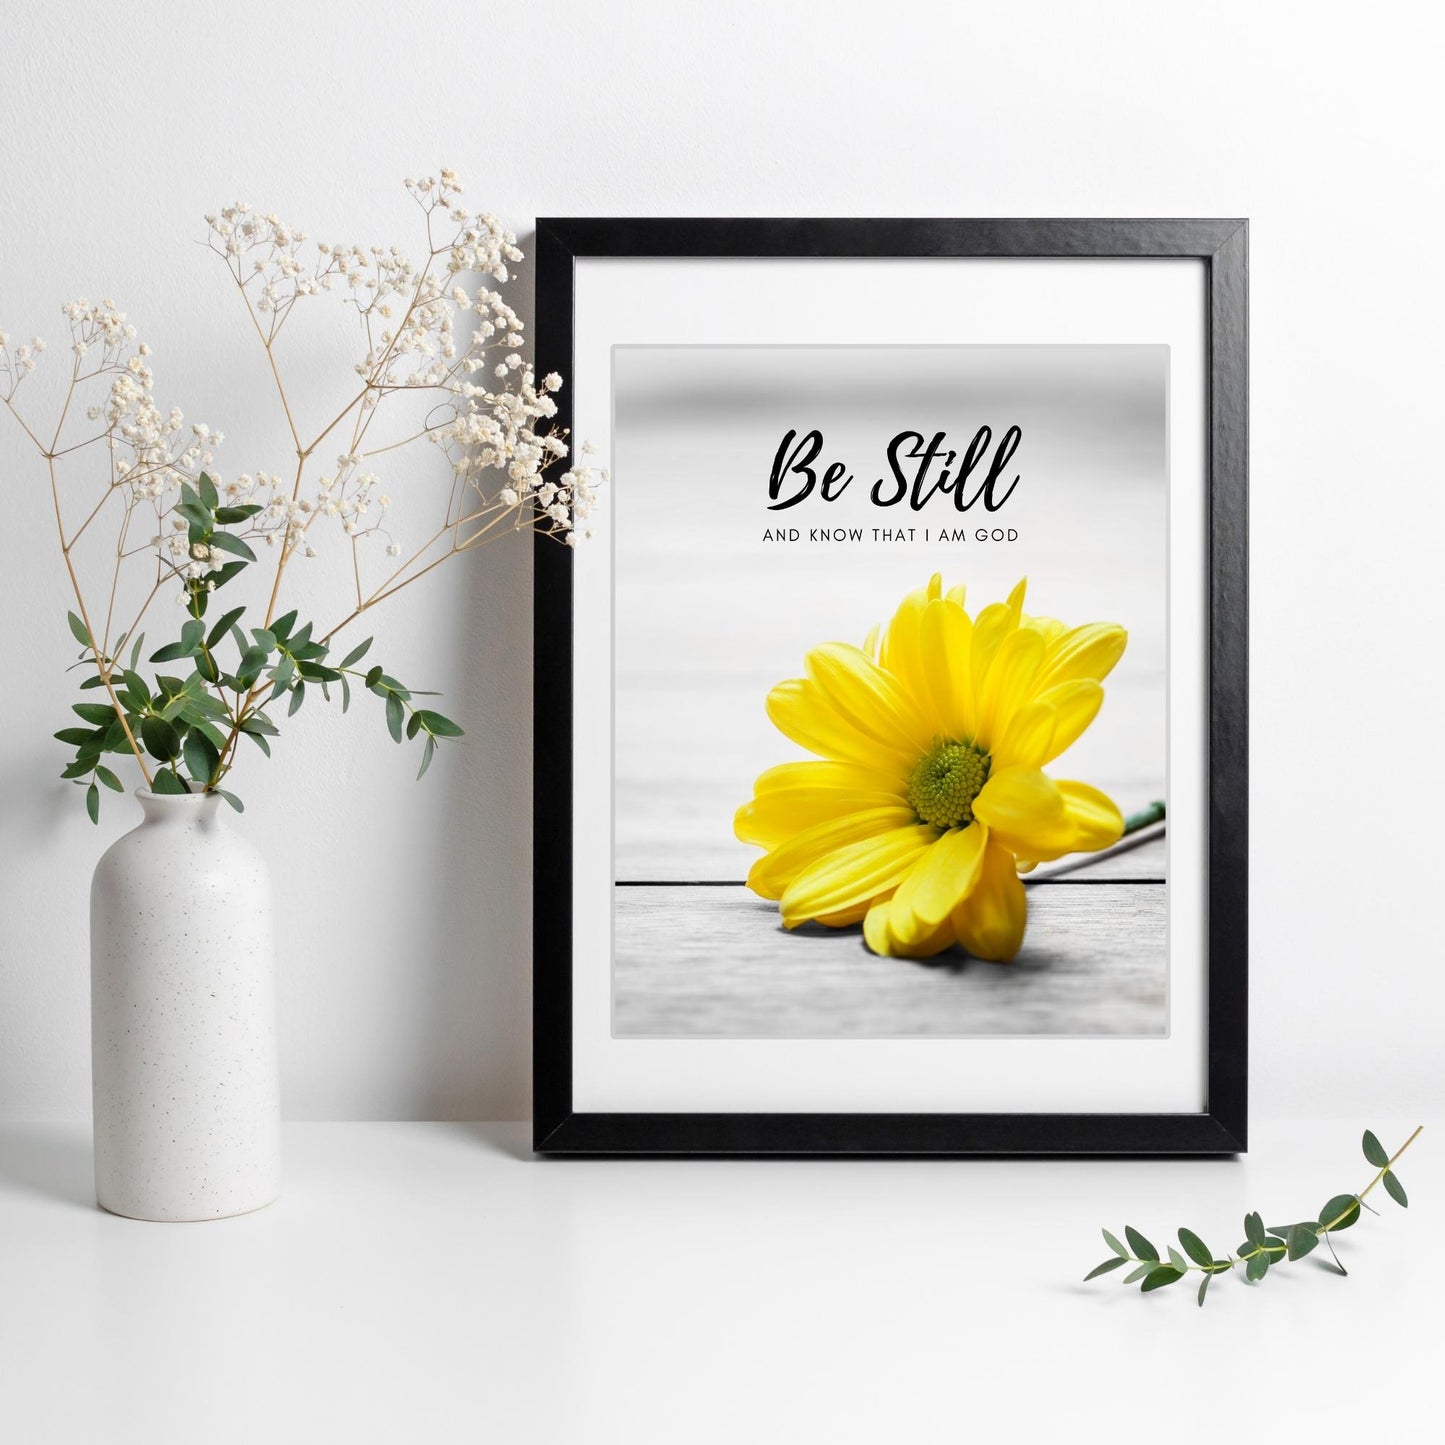 Inspirational Word Art - Be Still and know that I am God - Yellow Daisy Wall Decor (8x10 print) | bible verse Psalm 46:10 wall decor in black frame on white wall | oak7west.com